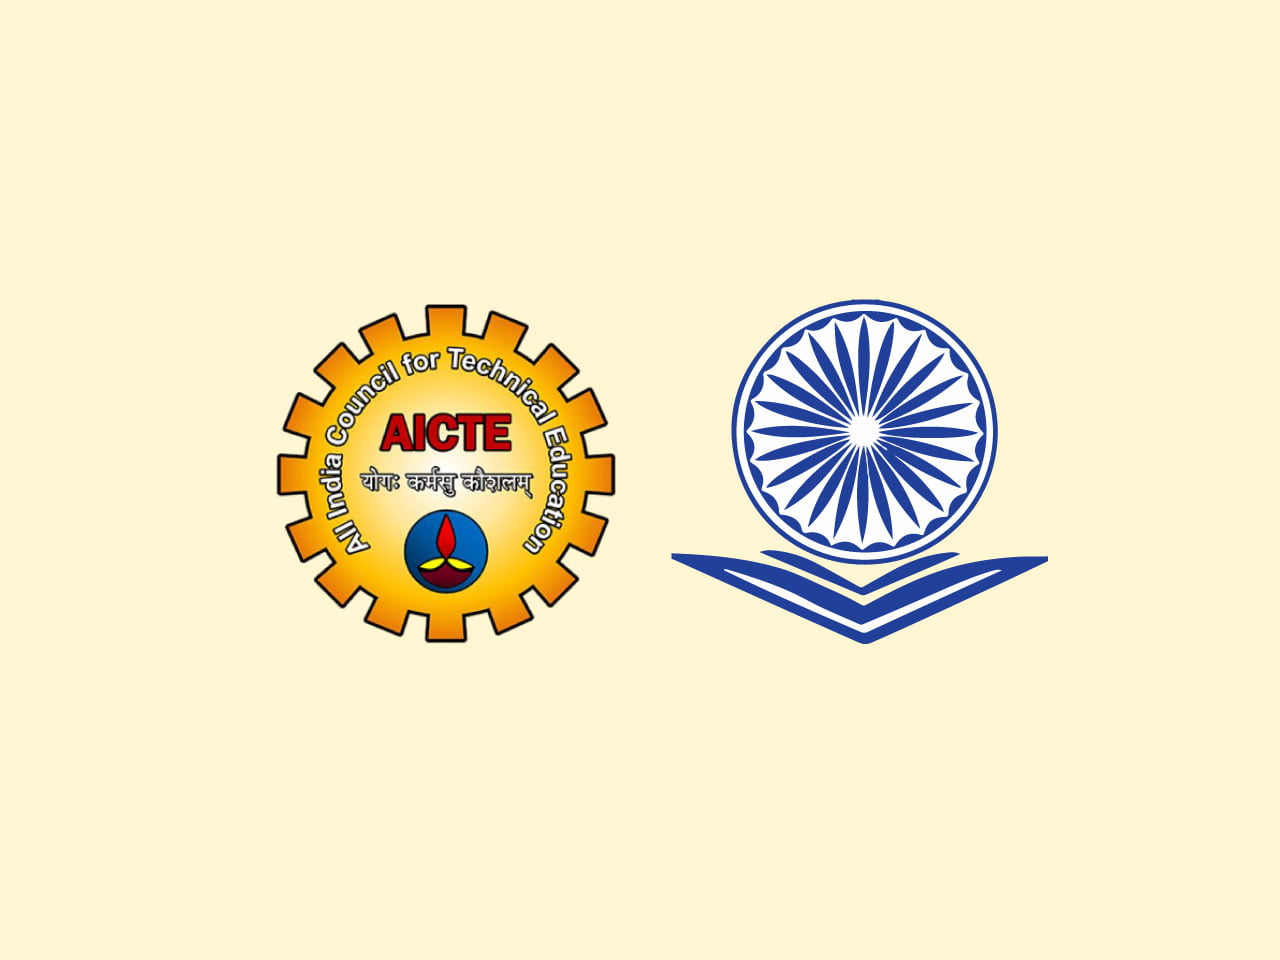 Government of India reportedly merging UGC and AICTE Together